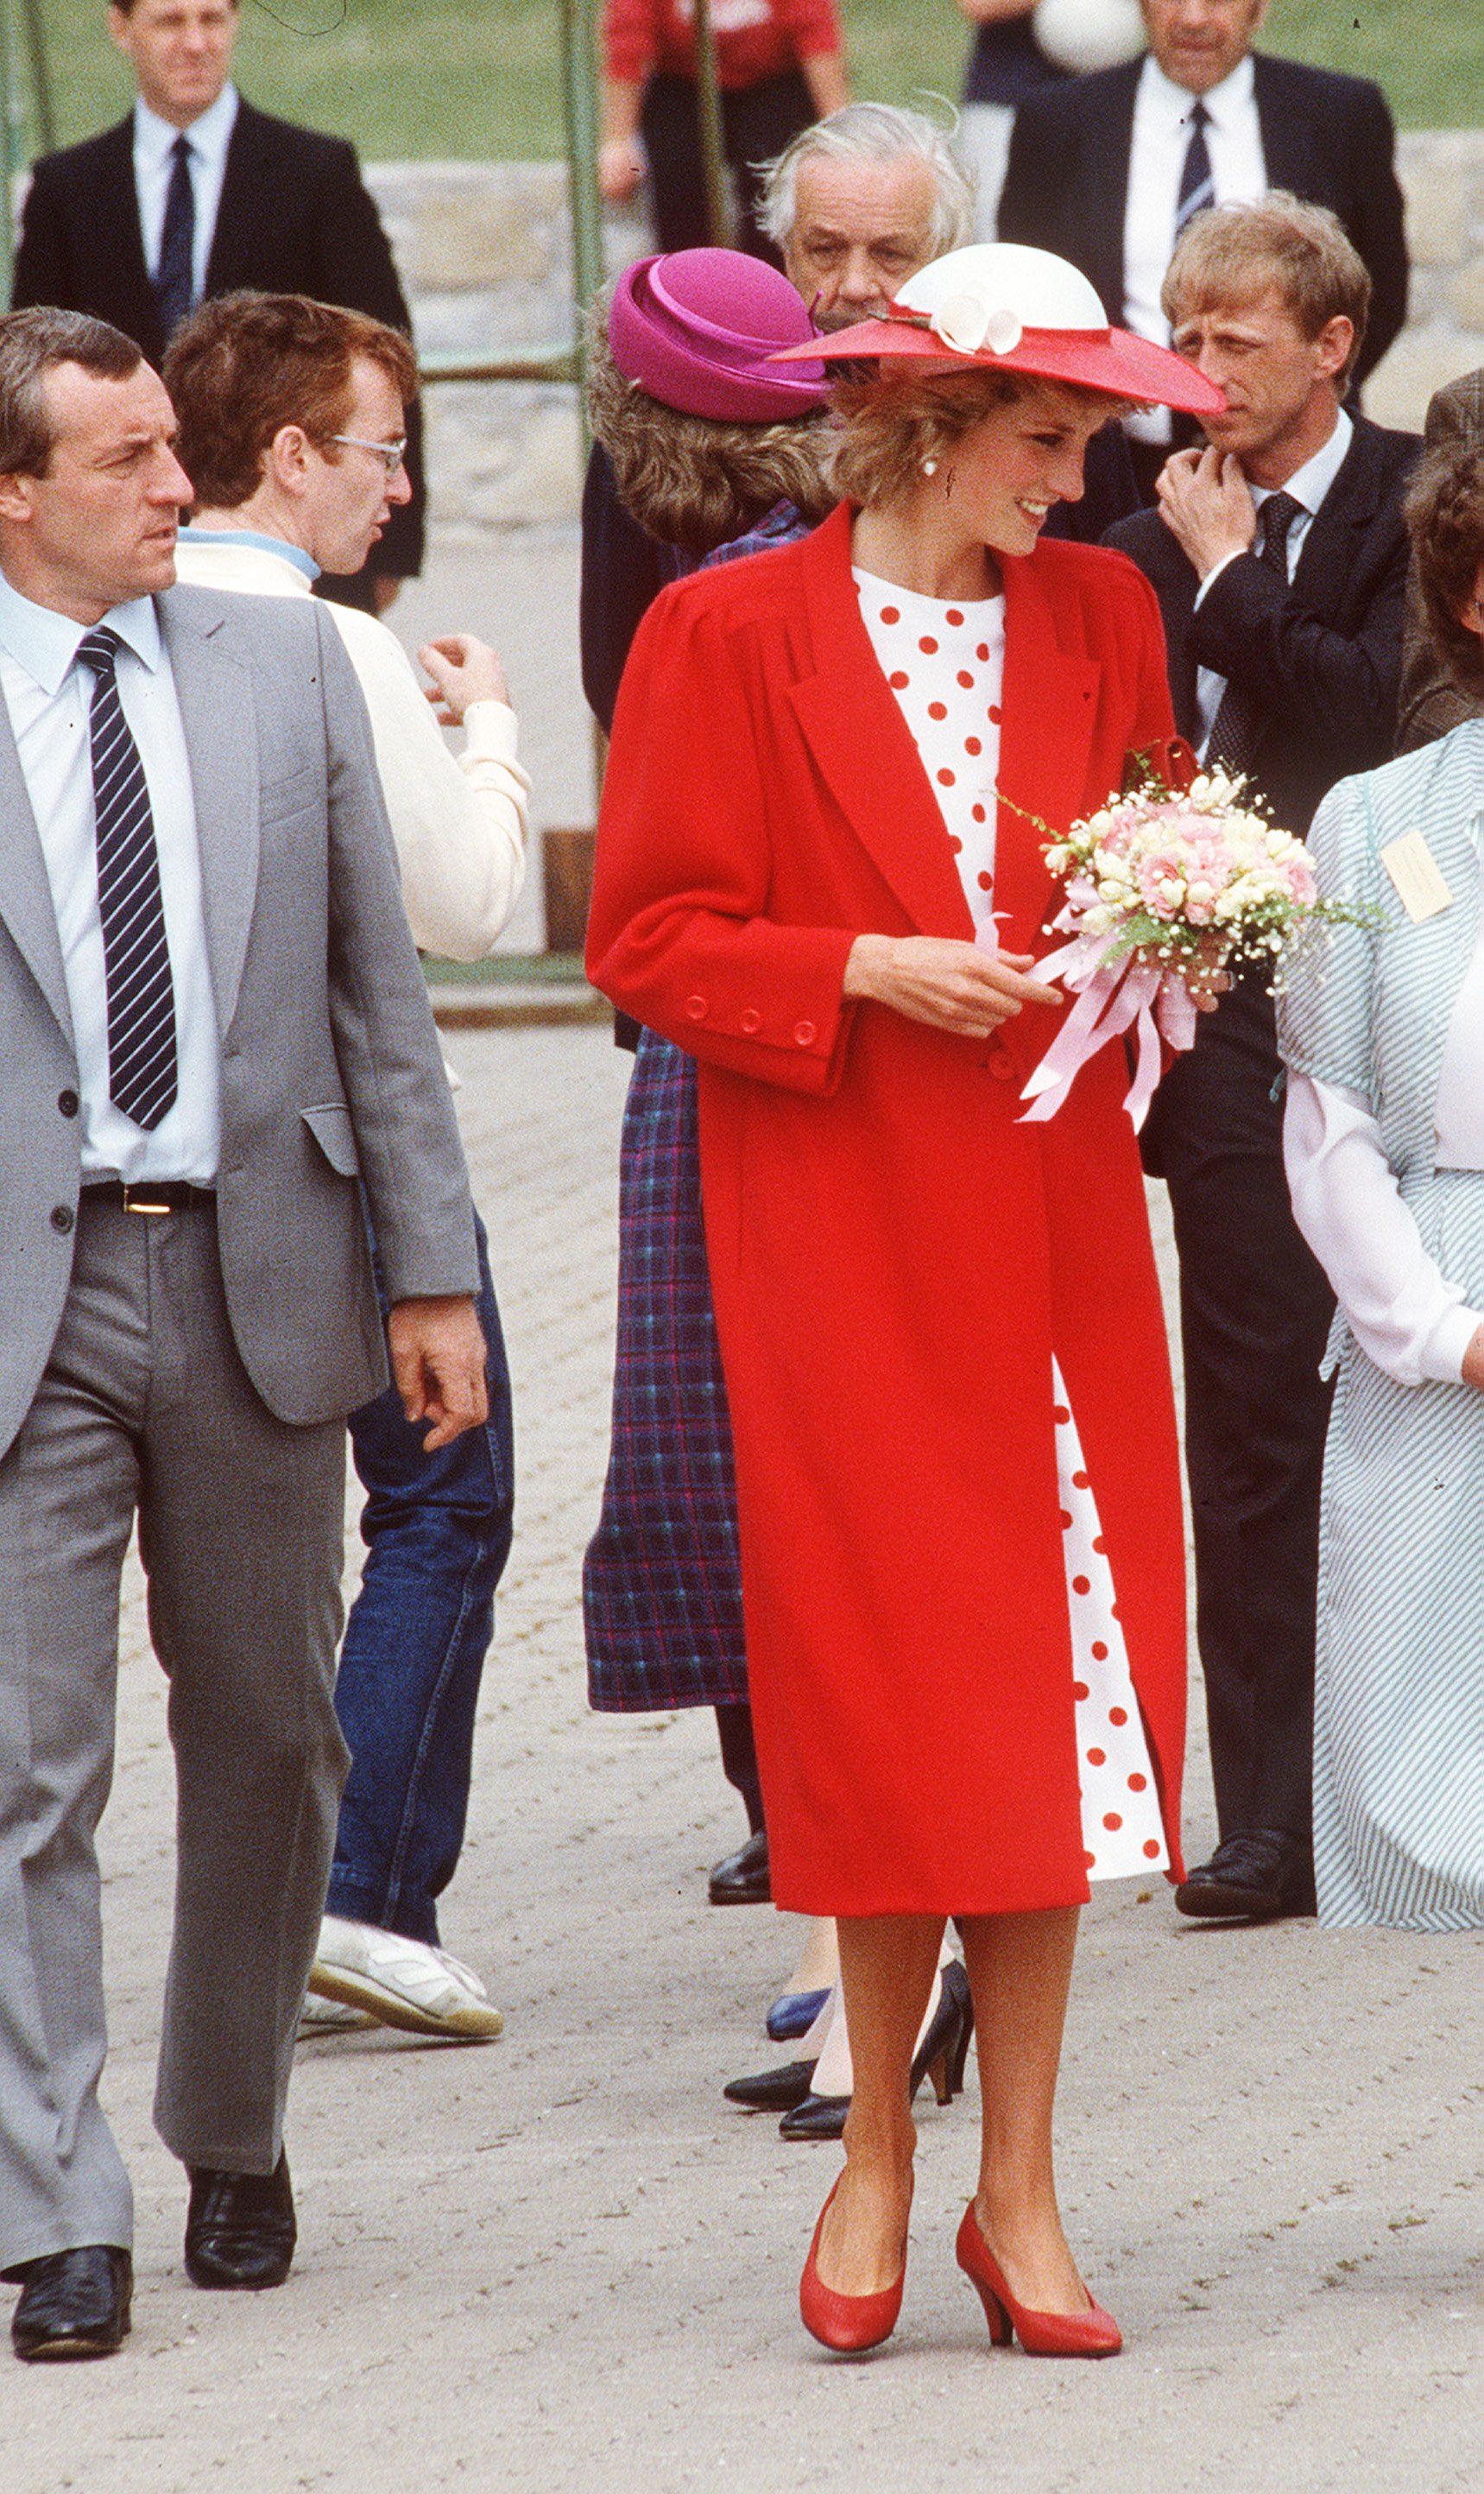  Diana, Princess of Wales, wearing a red jacket designed by Jan van Velden, with a white and red polka dot dress and a matching hat, with her bodyguard Barry Mannakee. | Source: Getty Images